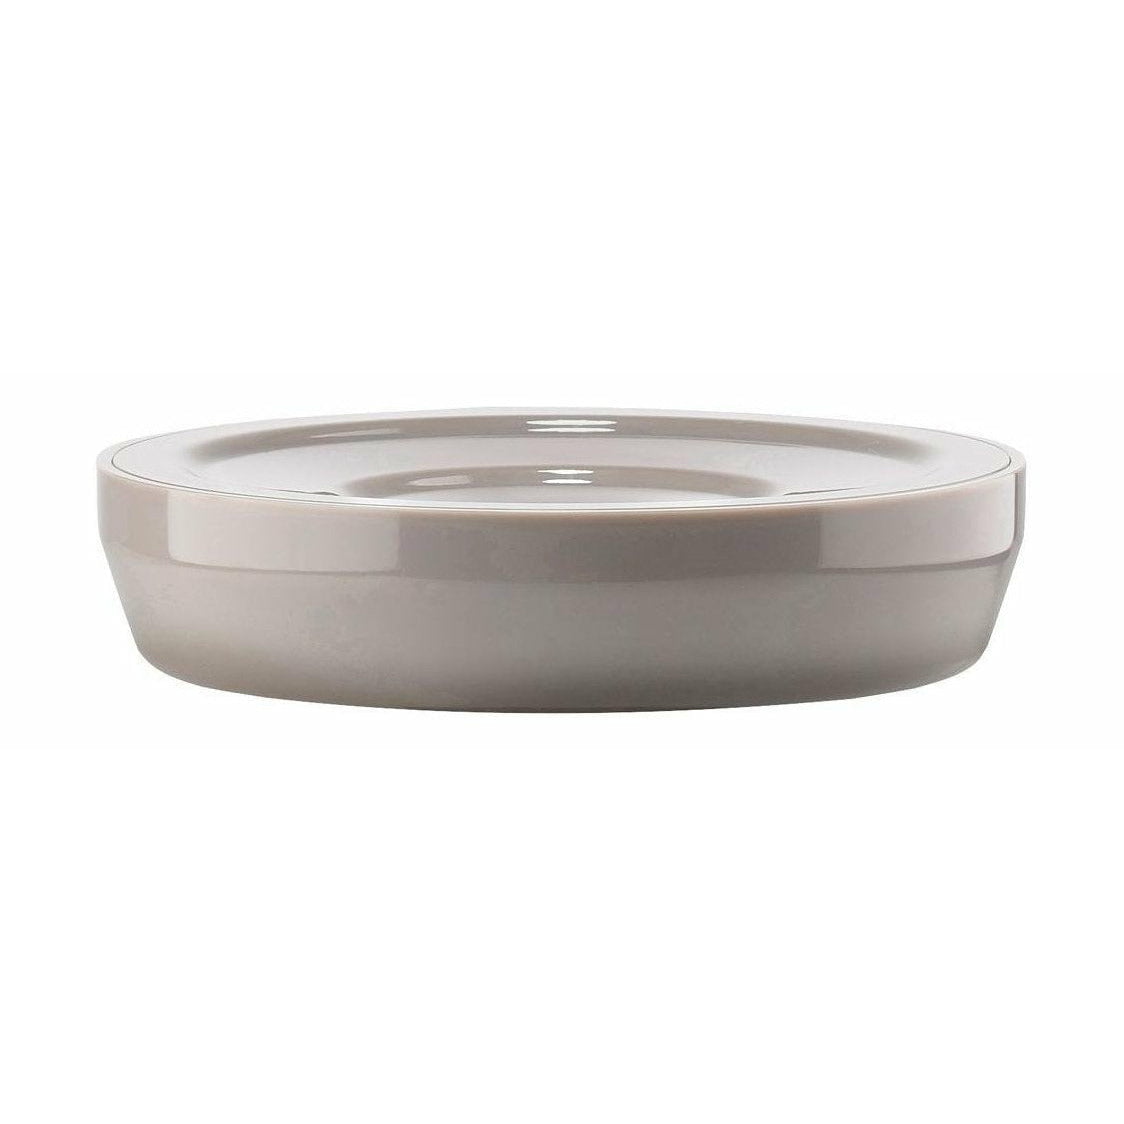 Zone Denmark Suii Soap Bowl, Taupe